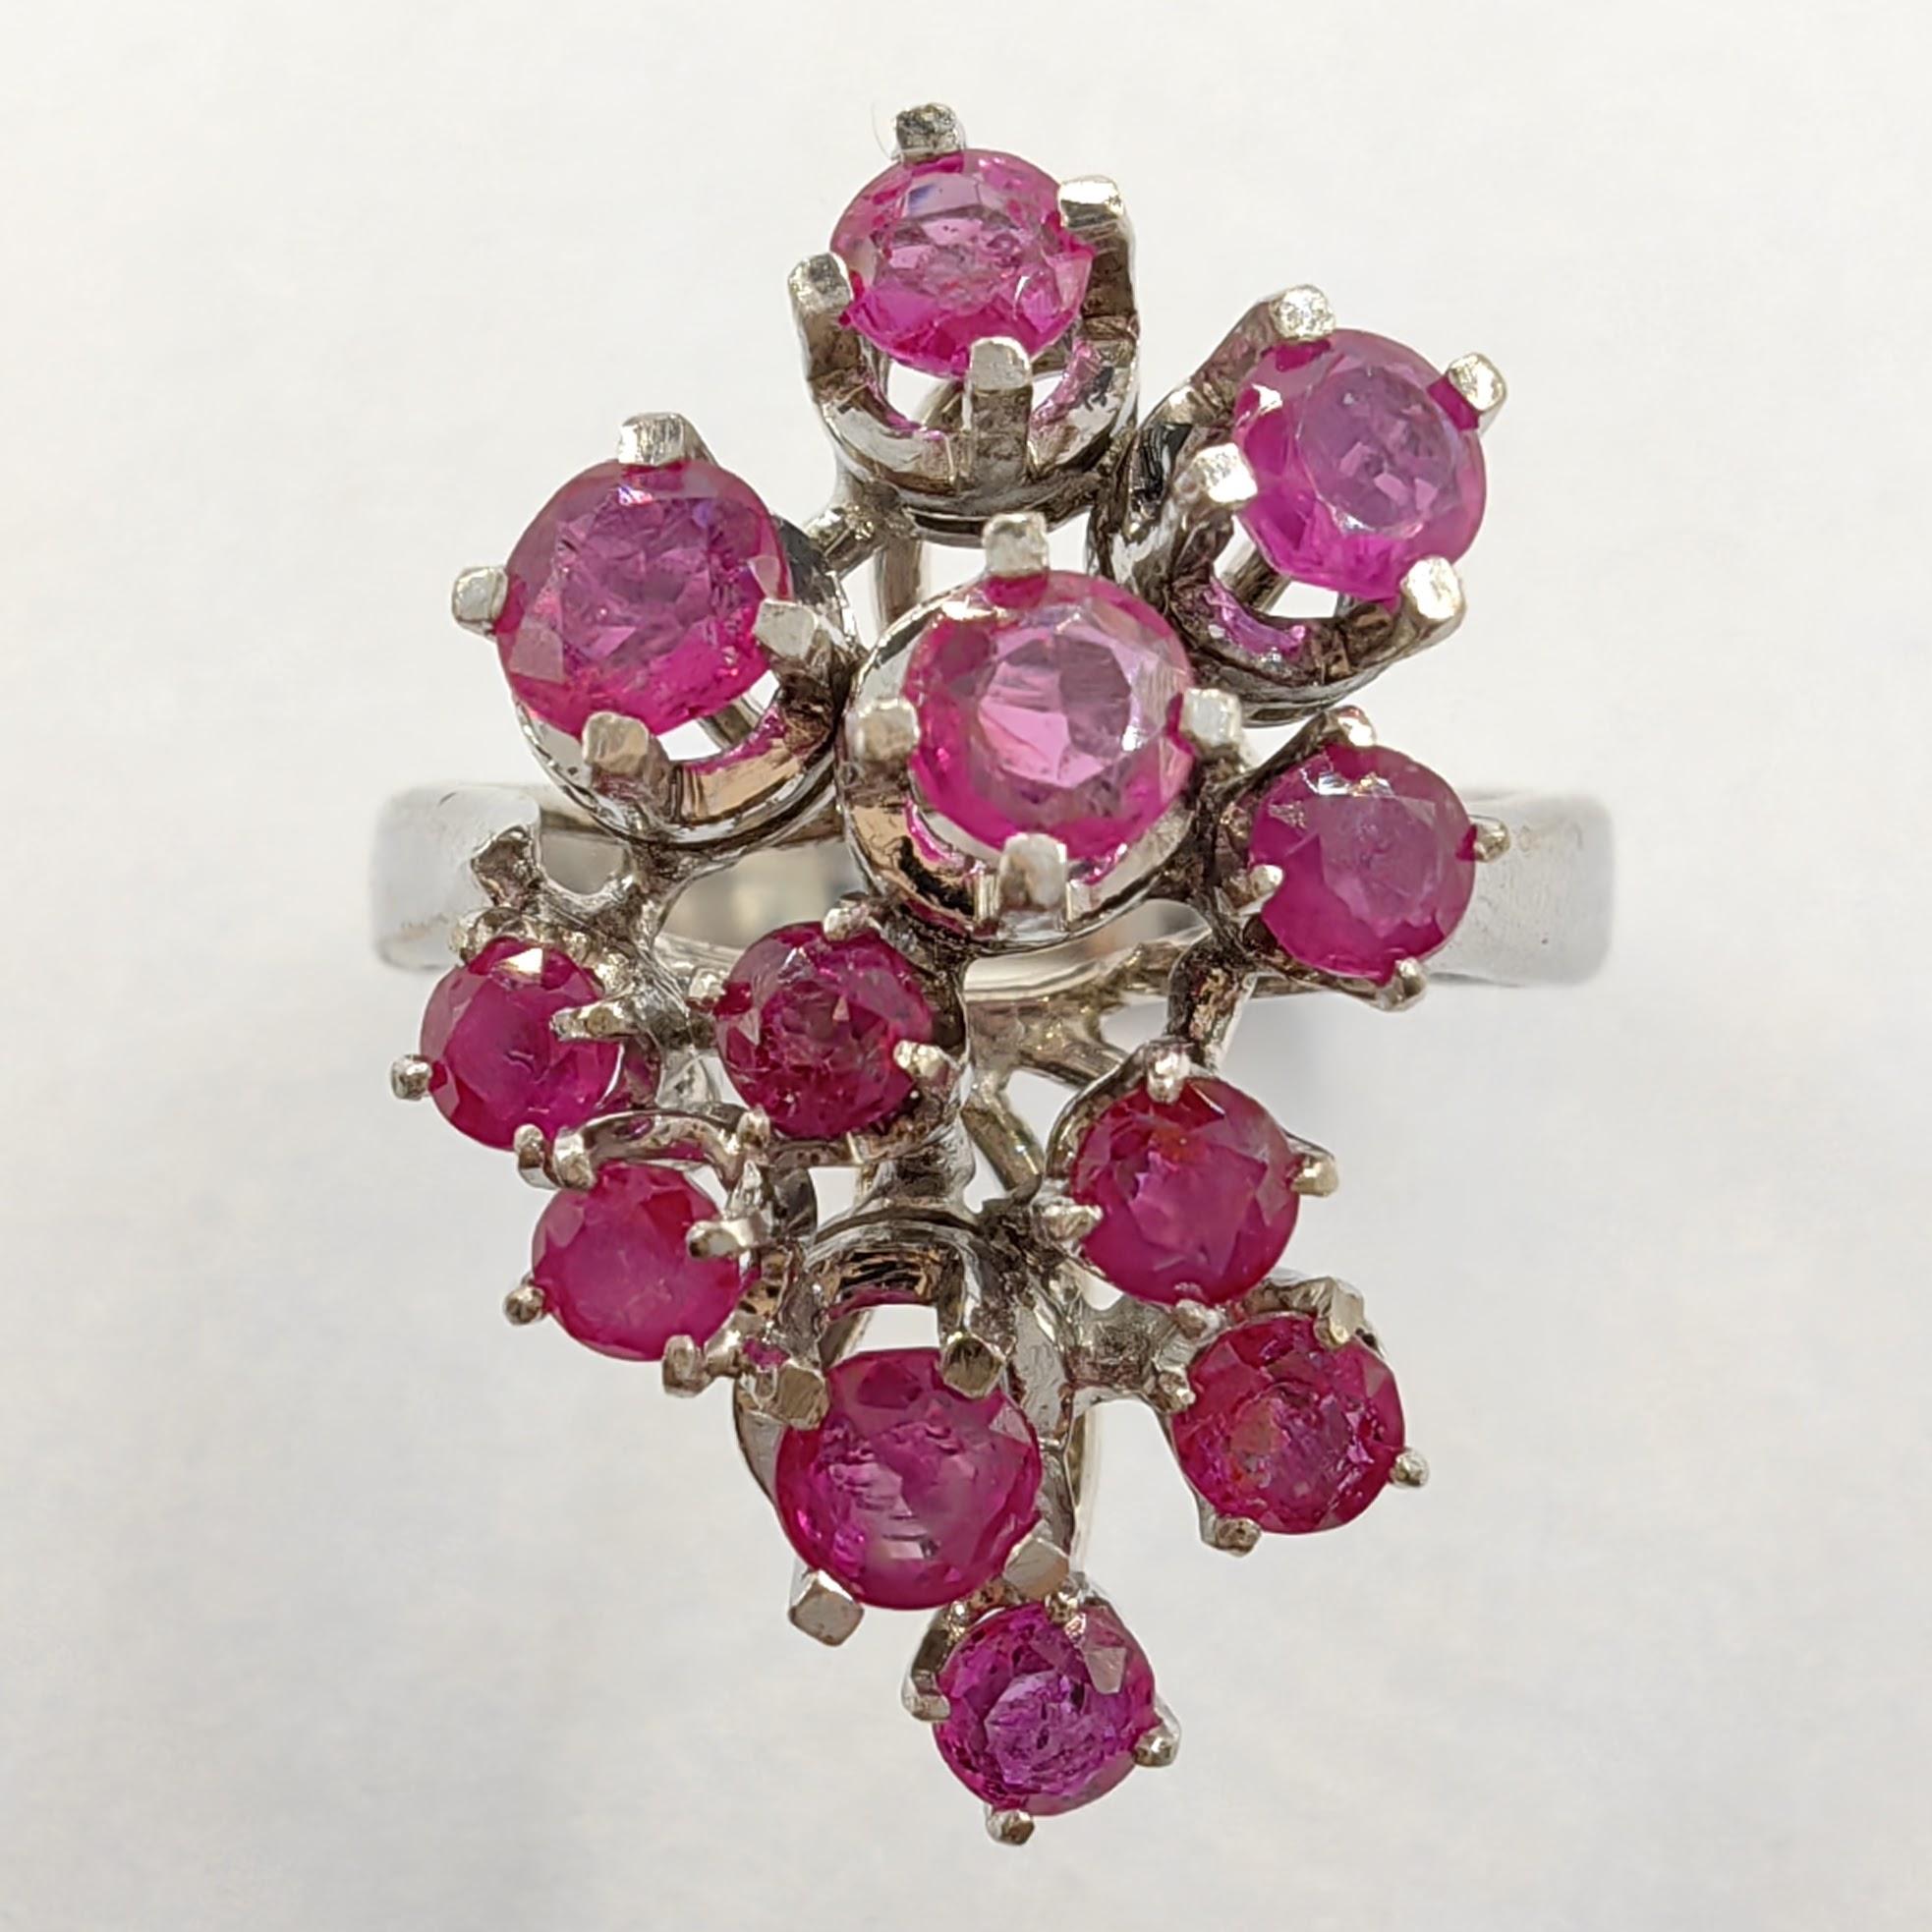 Introducing our extravagant Vintage Cluster Ruby Ring in White Gold, a true statement piece that exudes boldness and flair. This captivating ring showcases an elaborate design, featuring a cluster of sparkling rubies that creates a visually striking